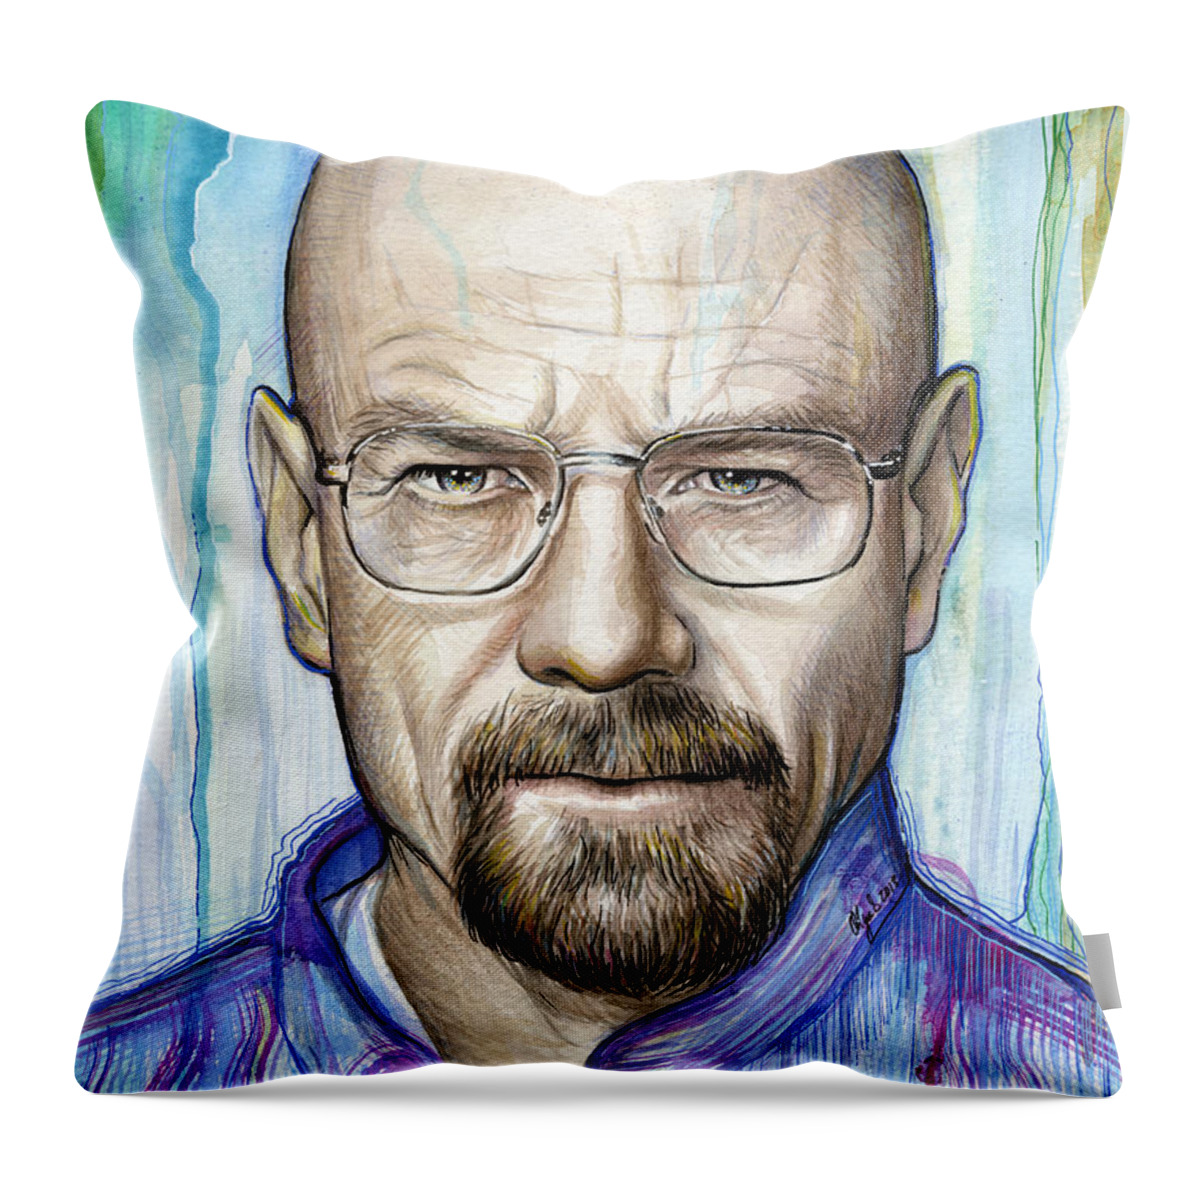 Breaking Bad Throw Pillow featuring the painting Walter White - Breaking Bad by Olga Shvartsur